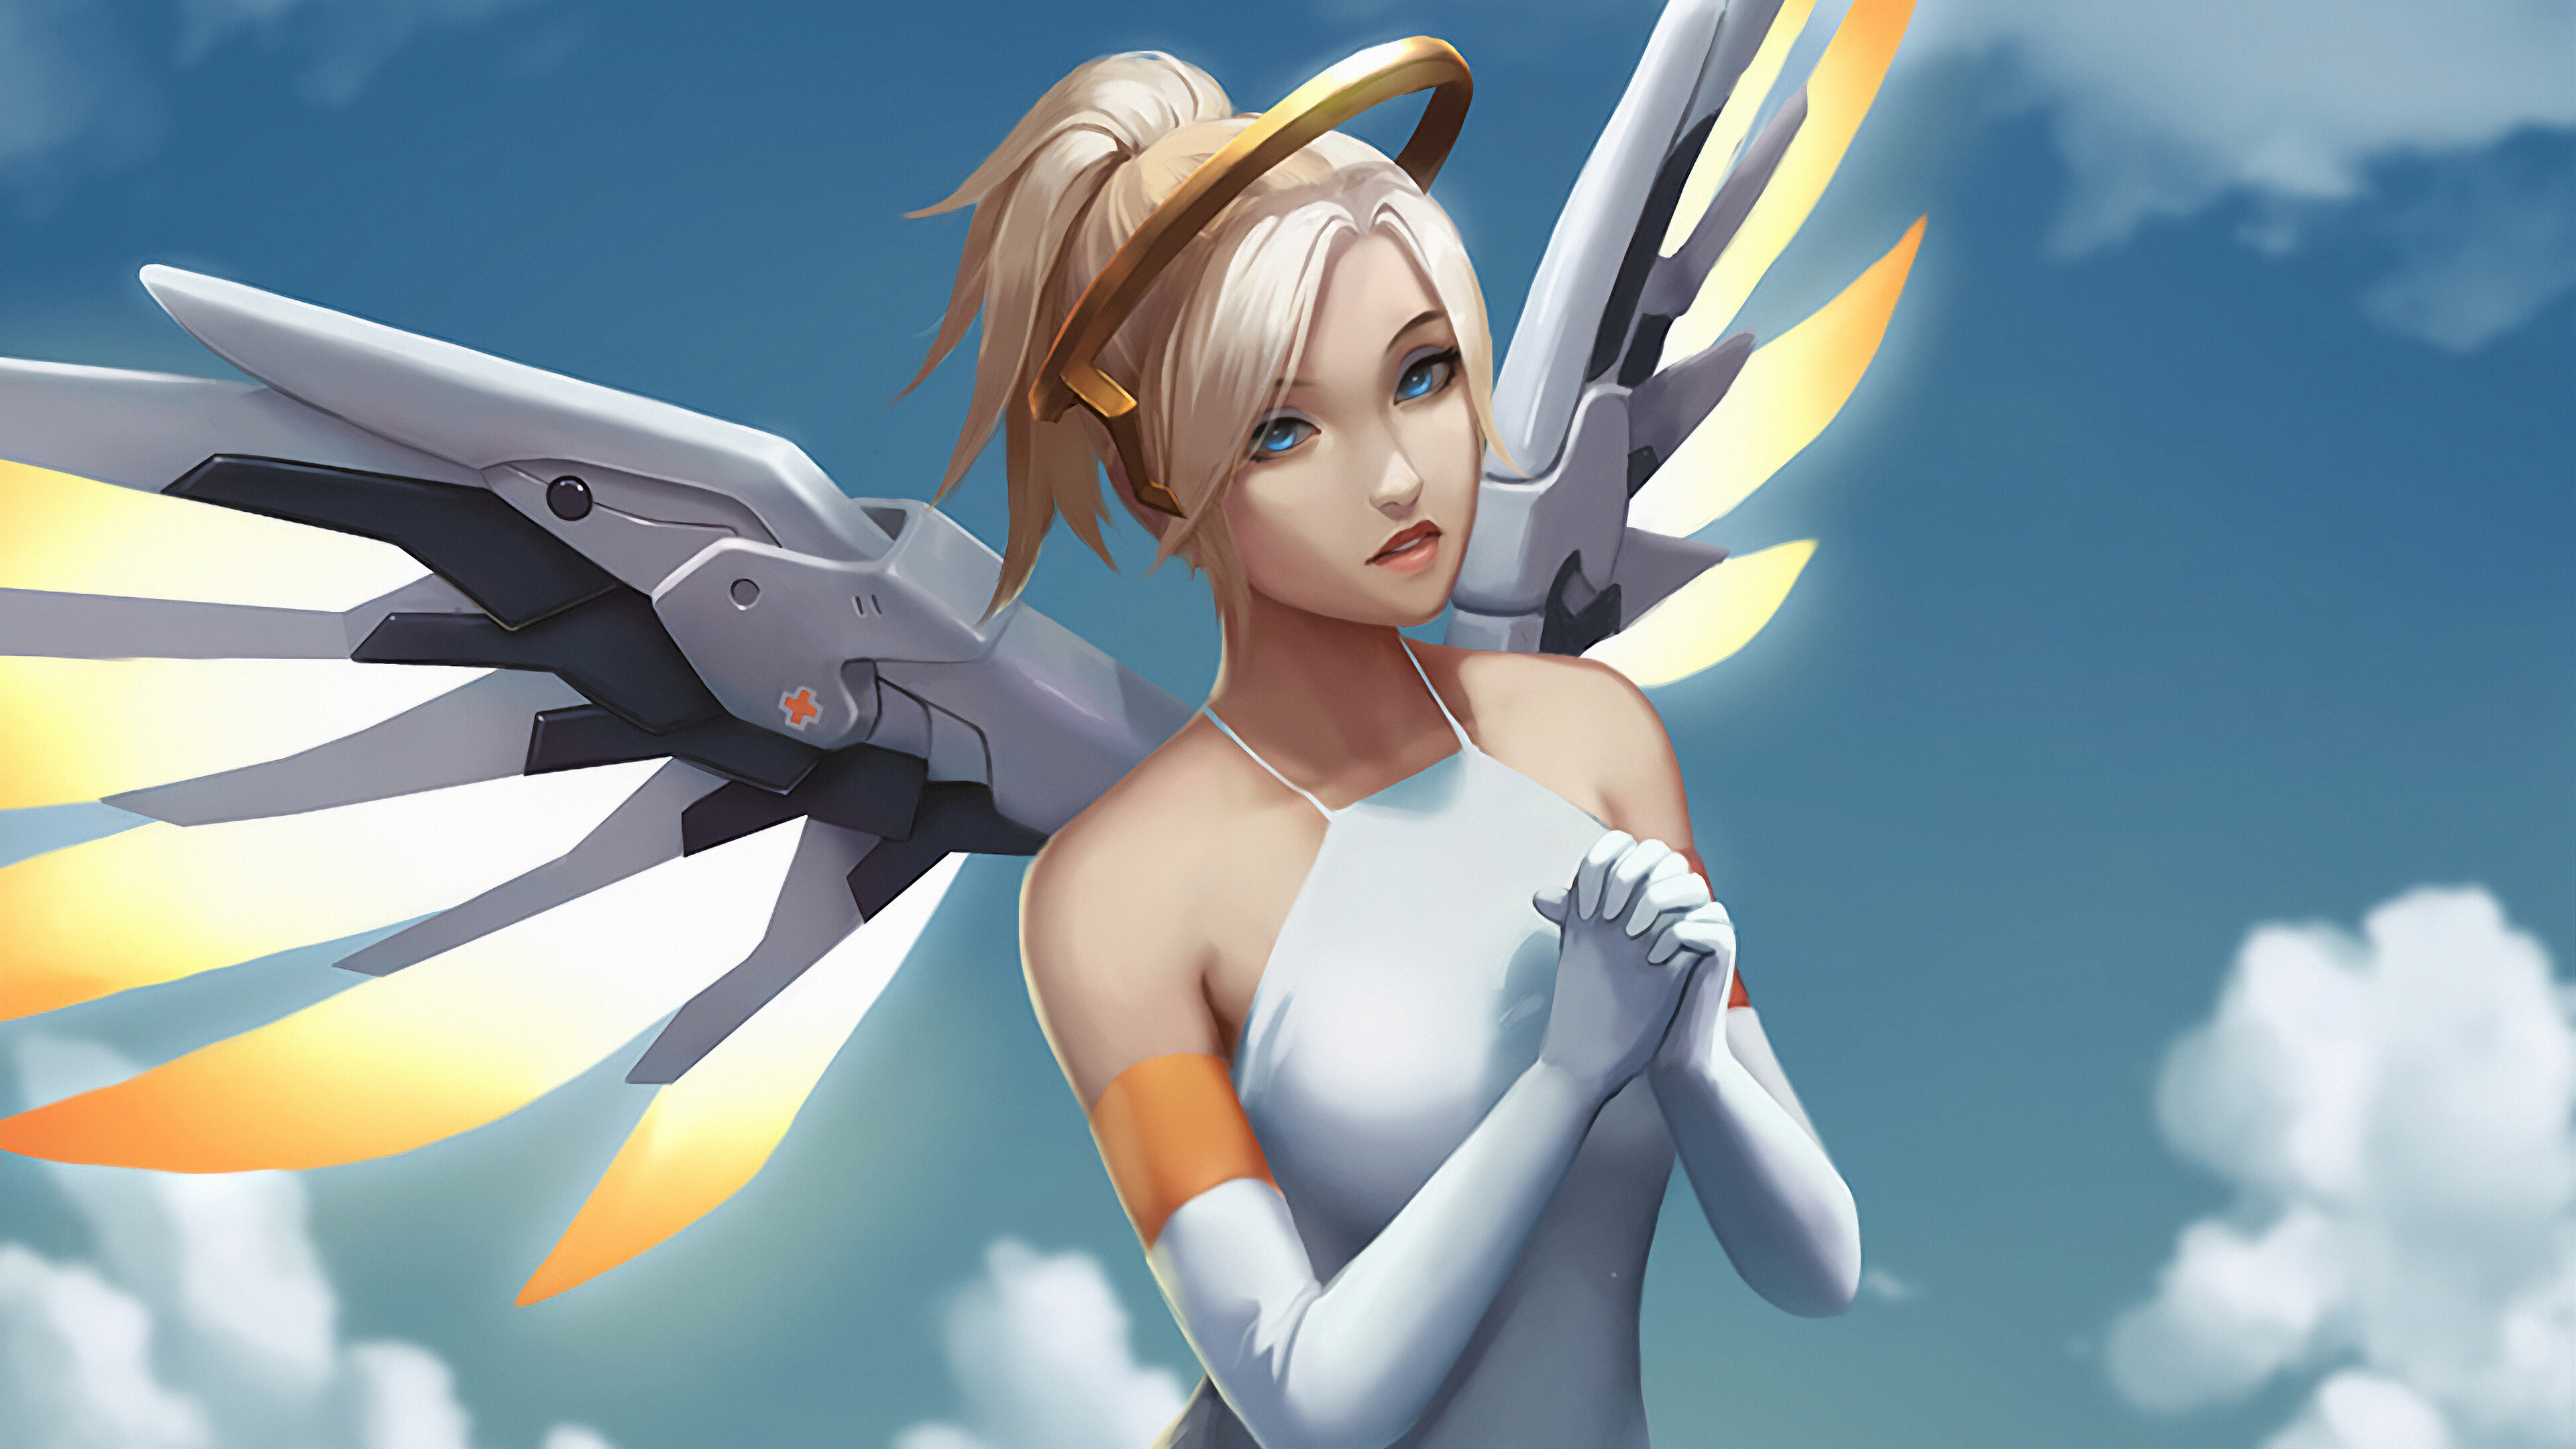 Overwatch: Mercy, A Support hero, Valkyrie Suit, Video game. 3840x2160 4K Background.